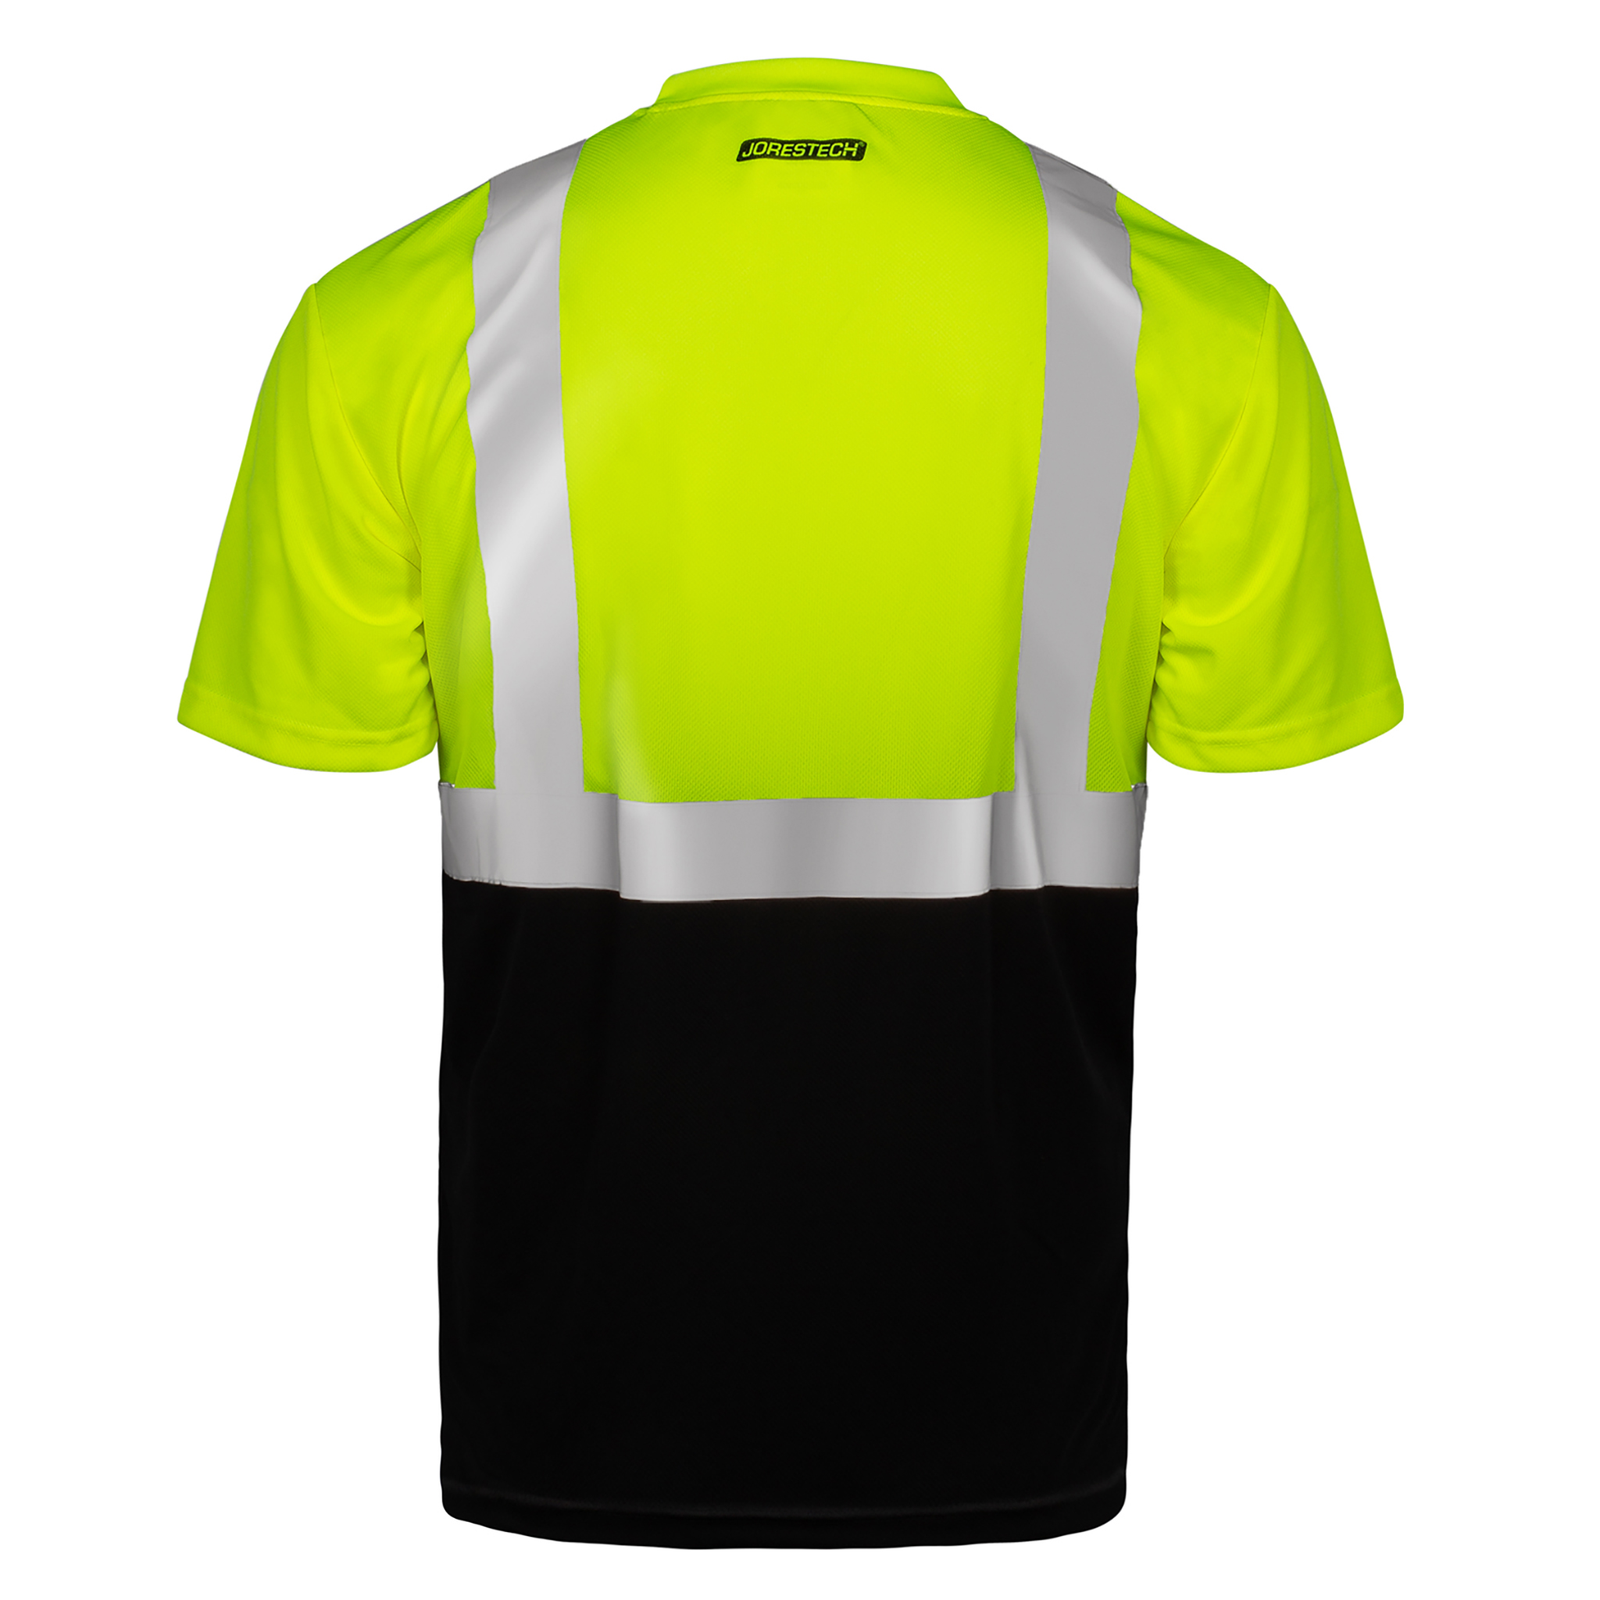 Two-Toned Hi-Vis Reflective Safety Shirt with Pocket | ANSI 3XL / Lime/Black by JORESTECH